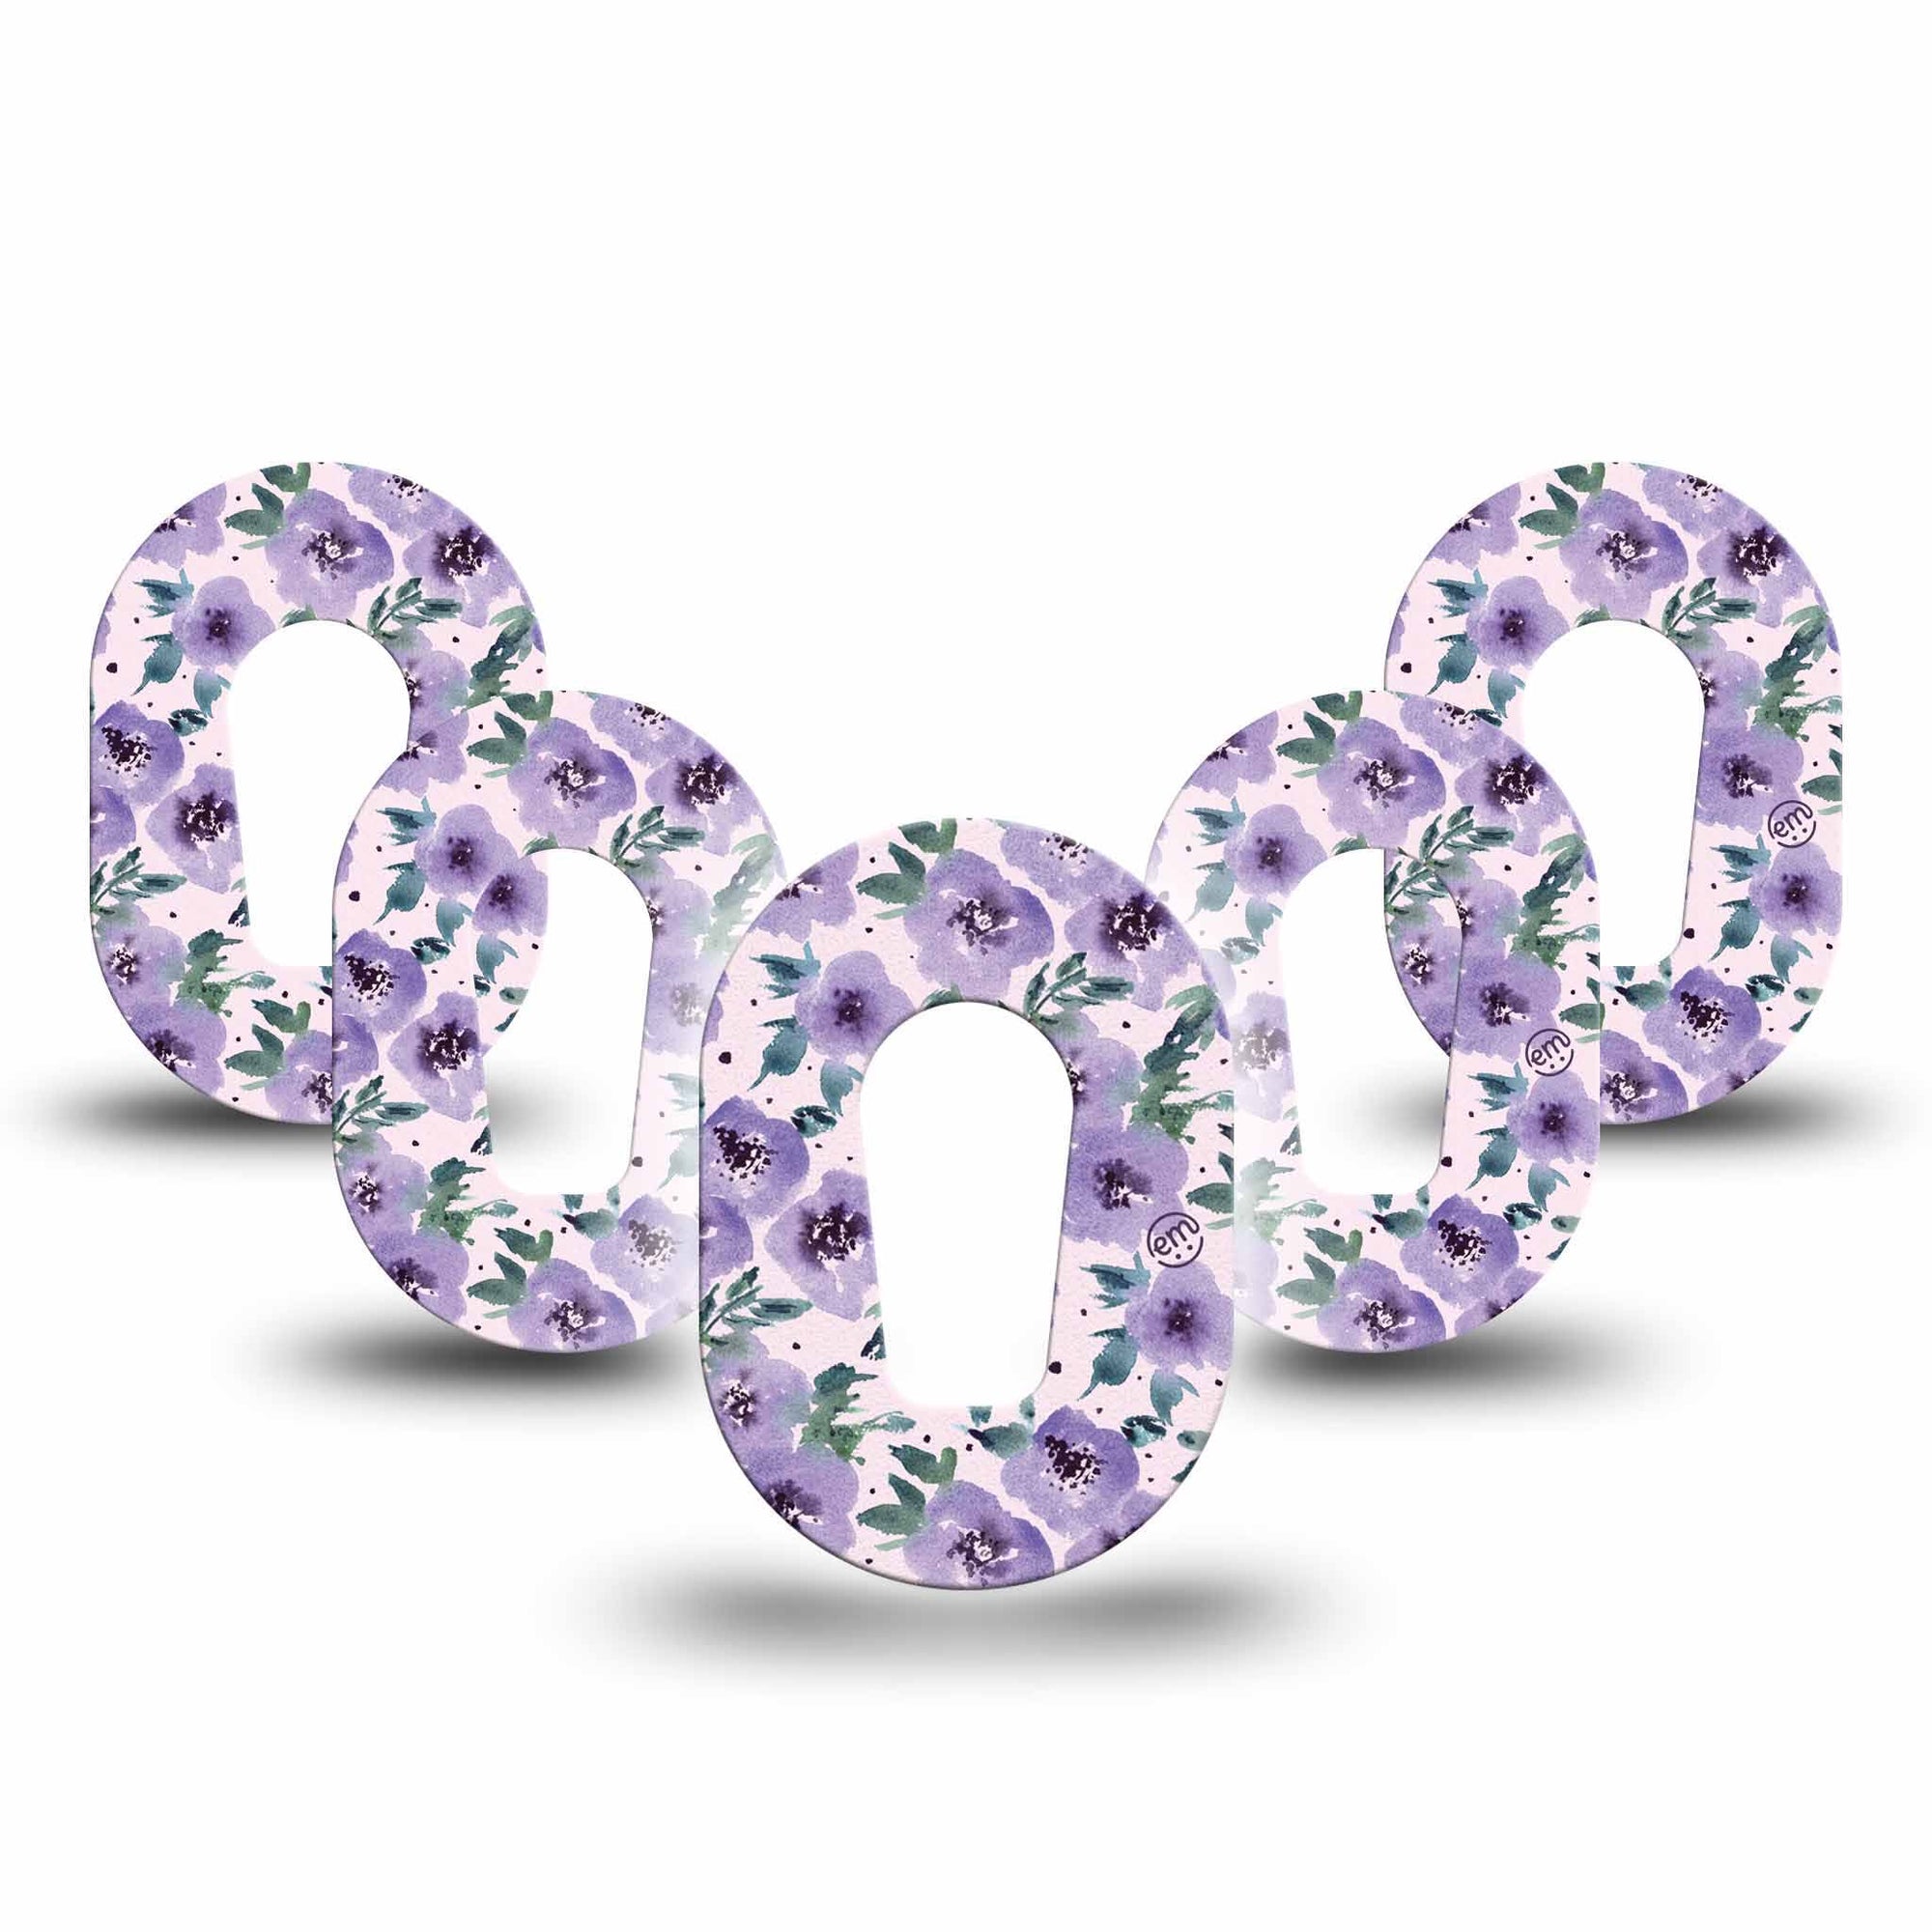 ExpressionMed Flowering Amethyst G6 Mini Tapes